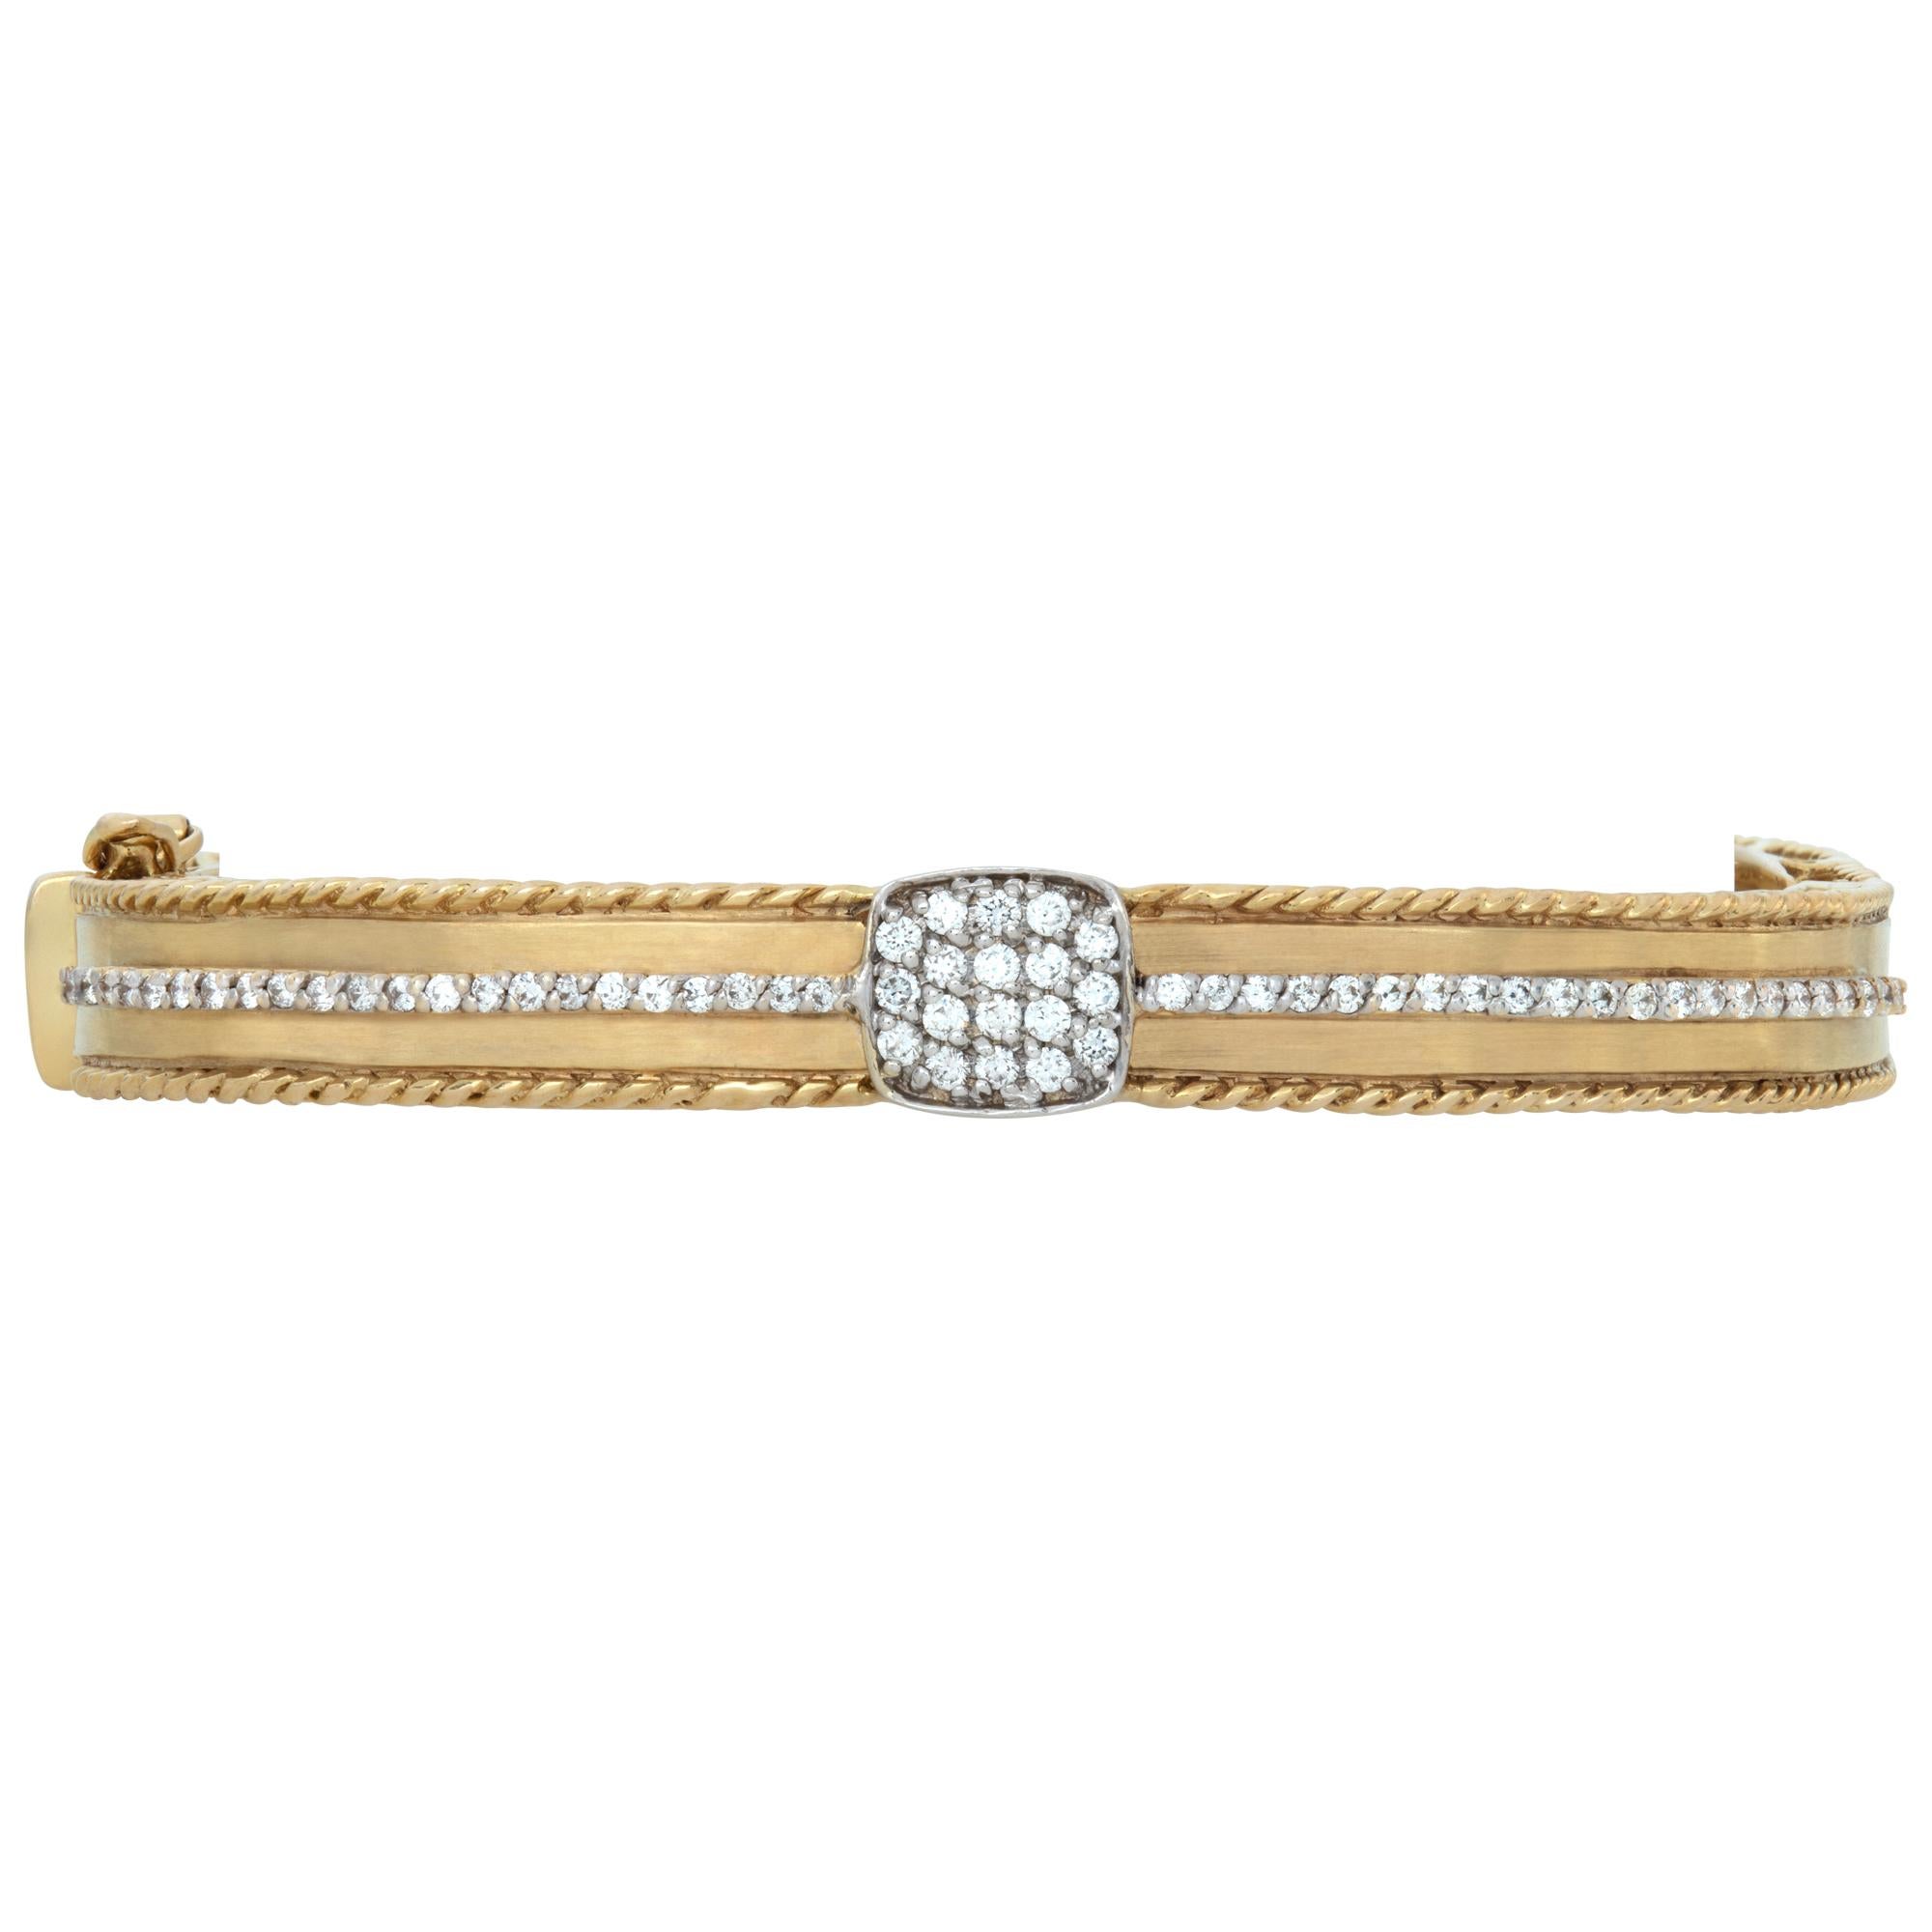 Diamond bangle in 14k yellow gold with approximately 1 carat in G-H color, VS clarity diamonds. Fits 6-7 inches wrist, width 8mm.